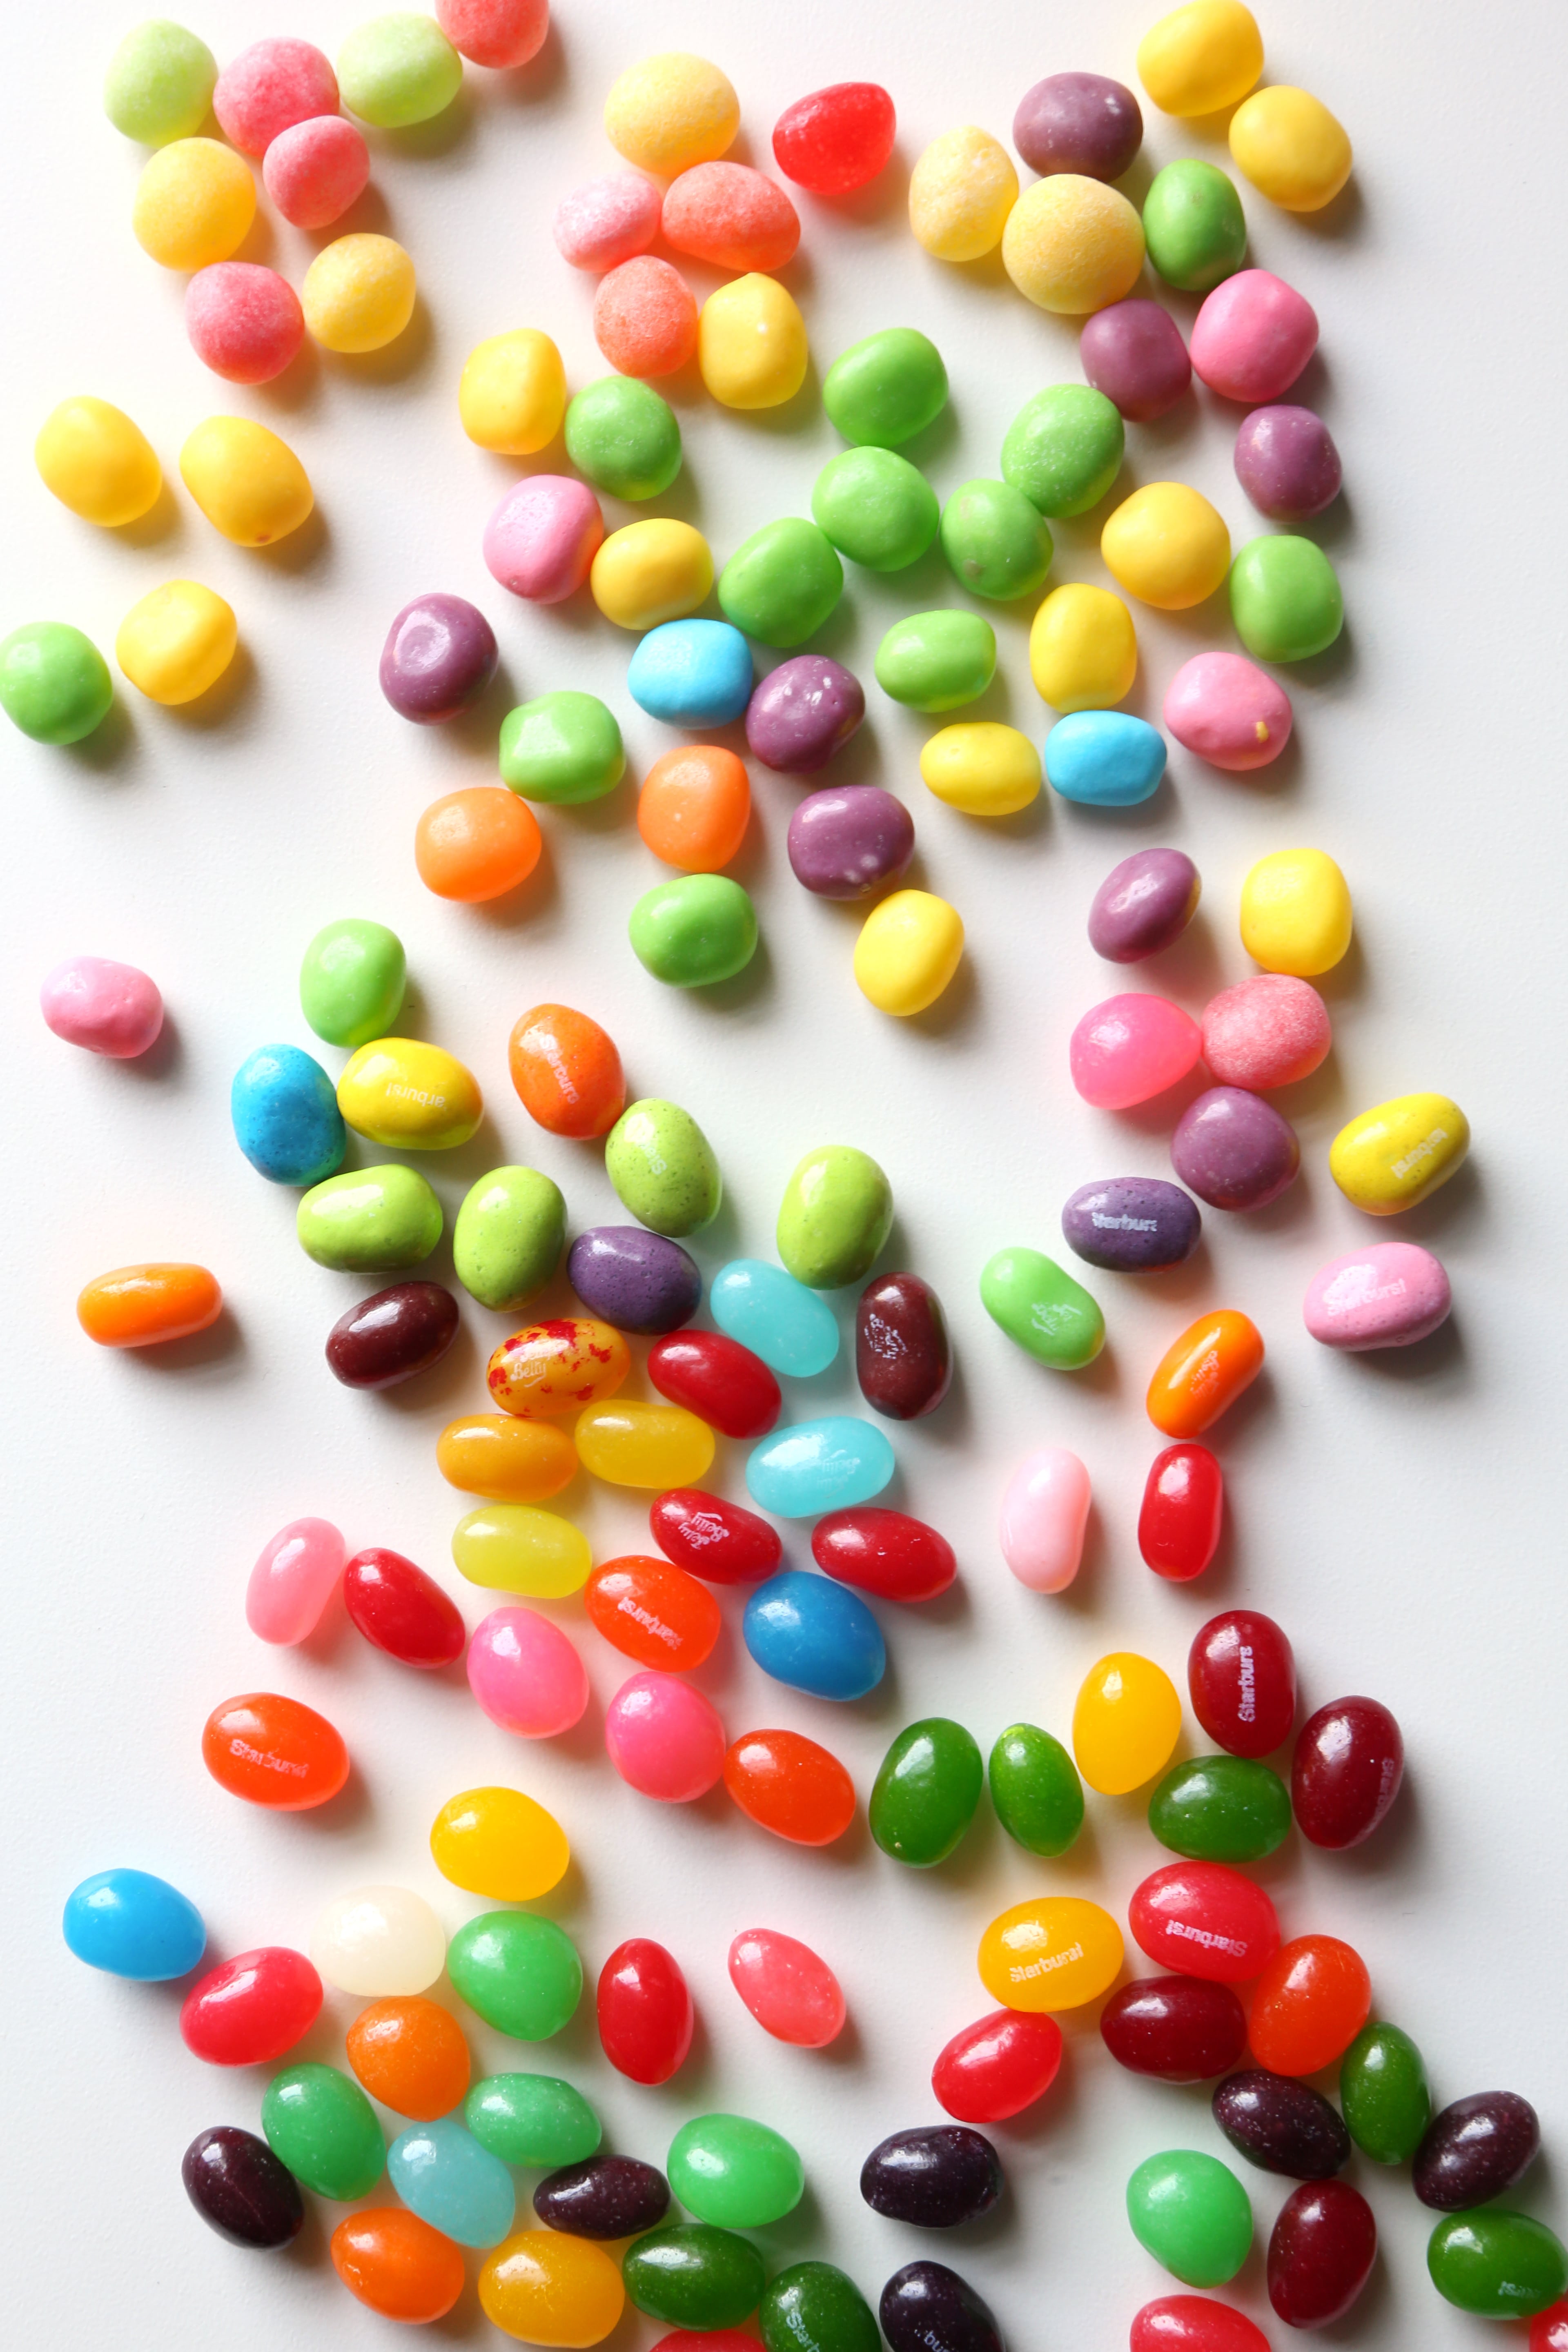 What Is the Best Jelly Bean?